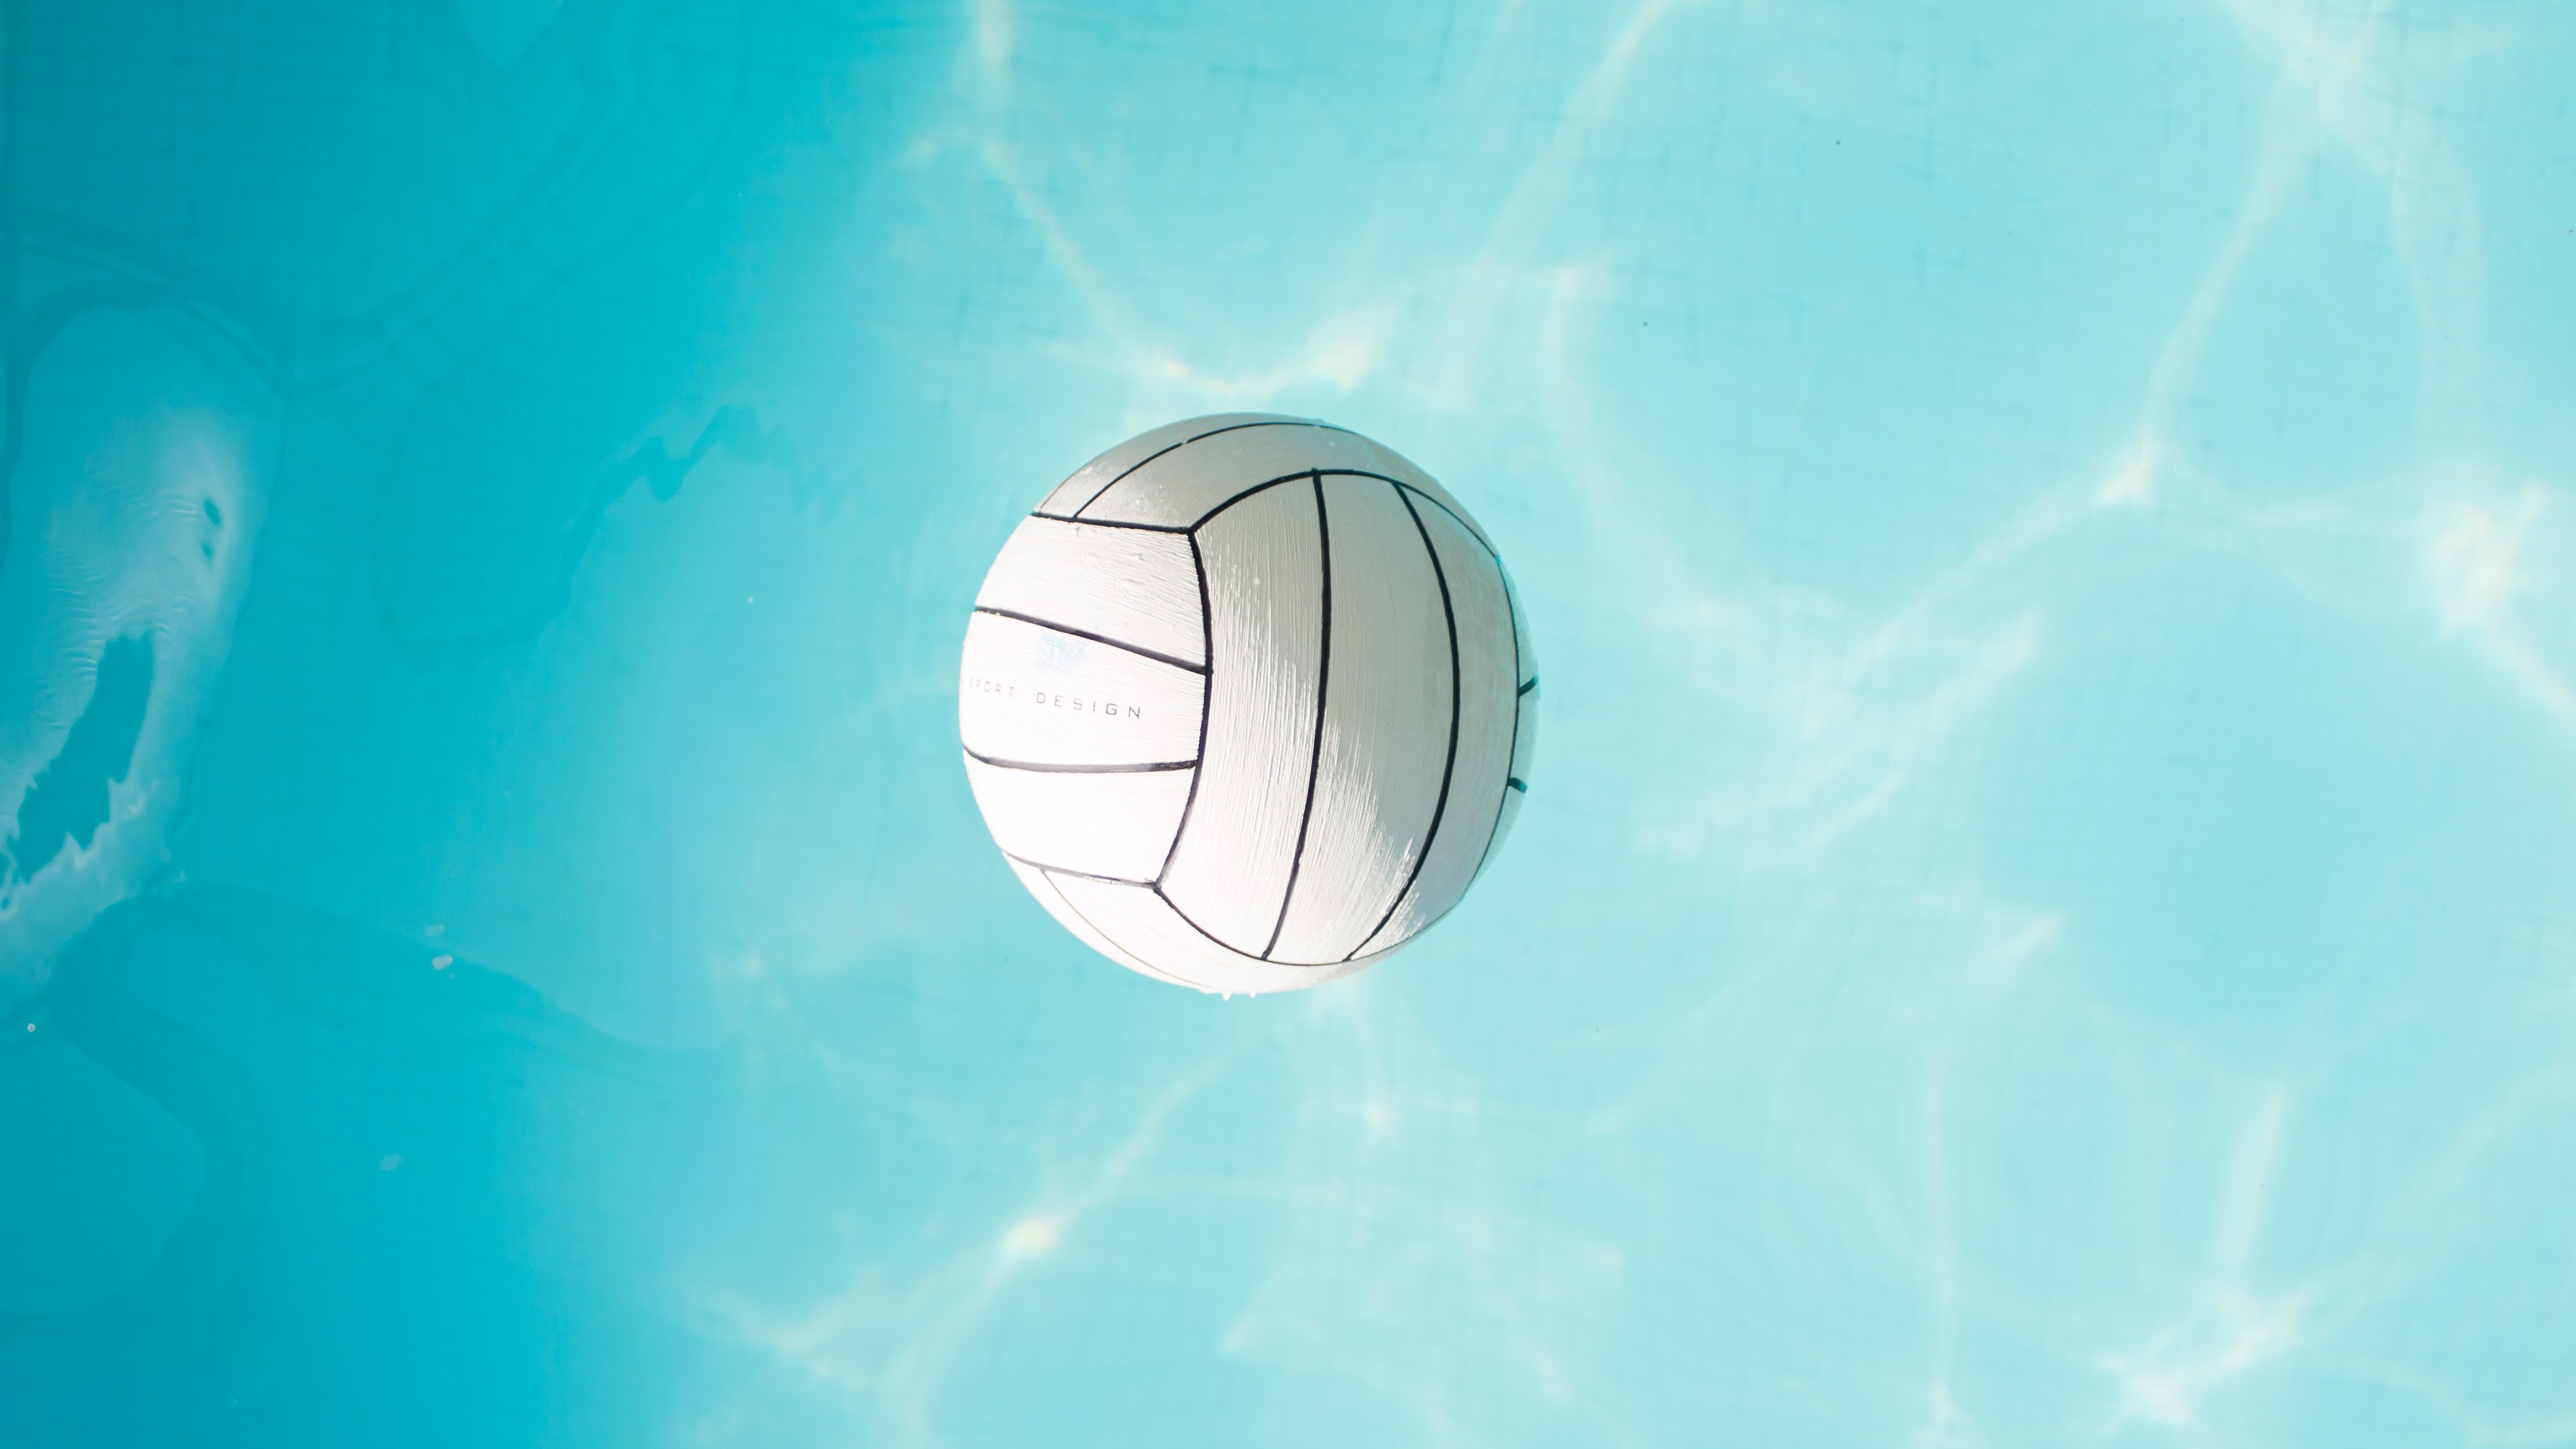 Wallpaper Volleyball Blue Water UHD 4k Picture Image